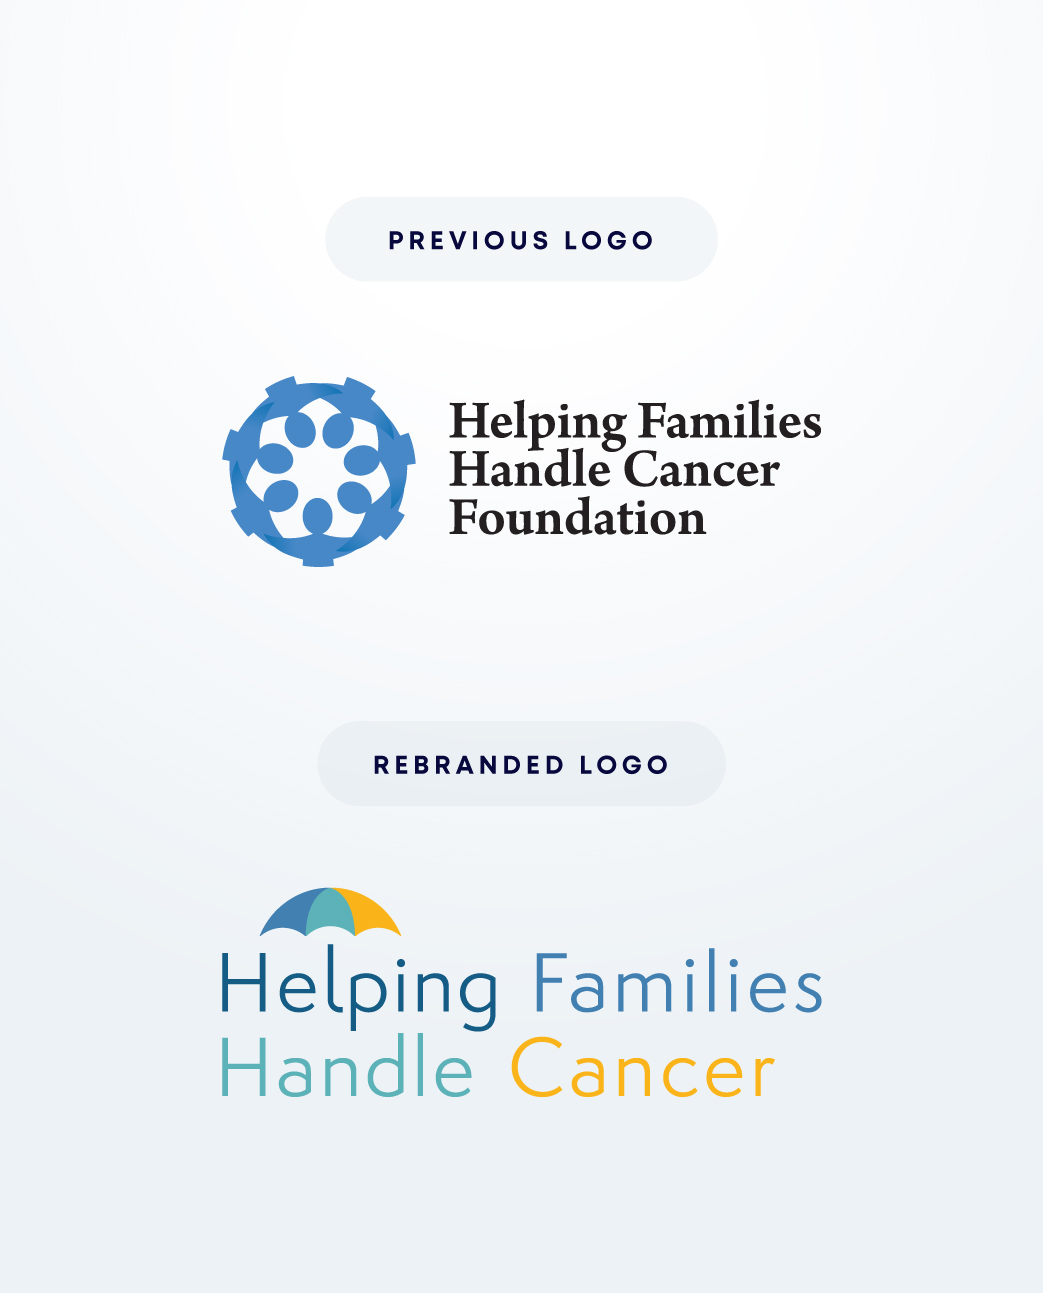 Helping Families Handle Cancer - Logo comparison